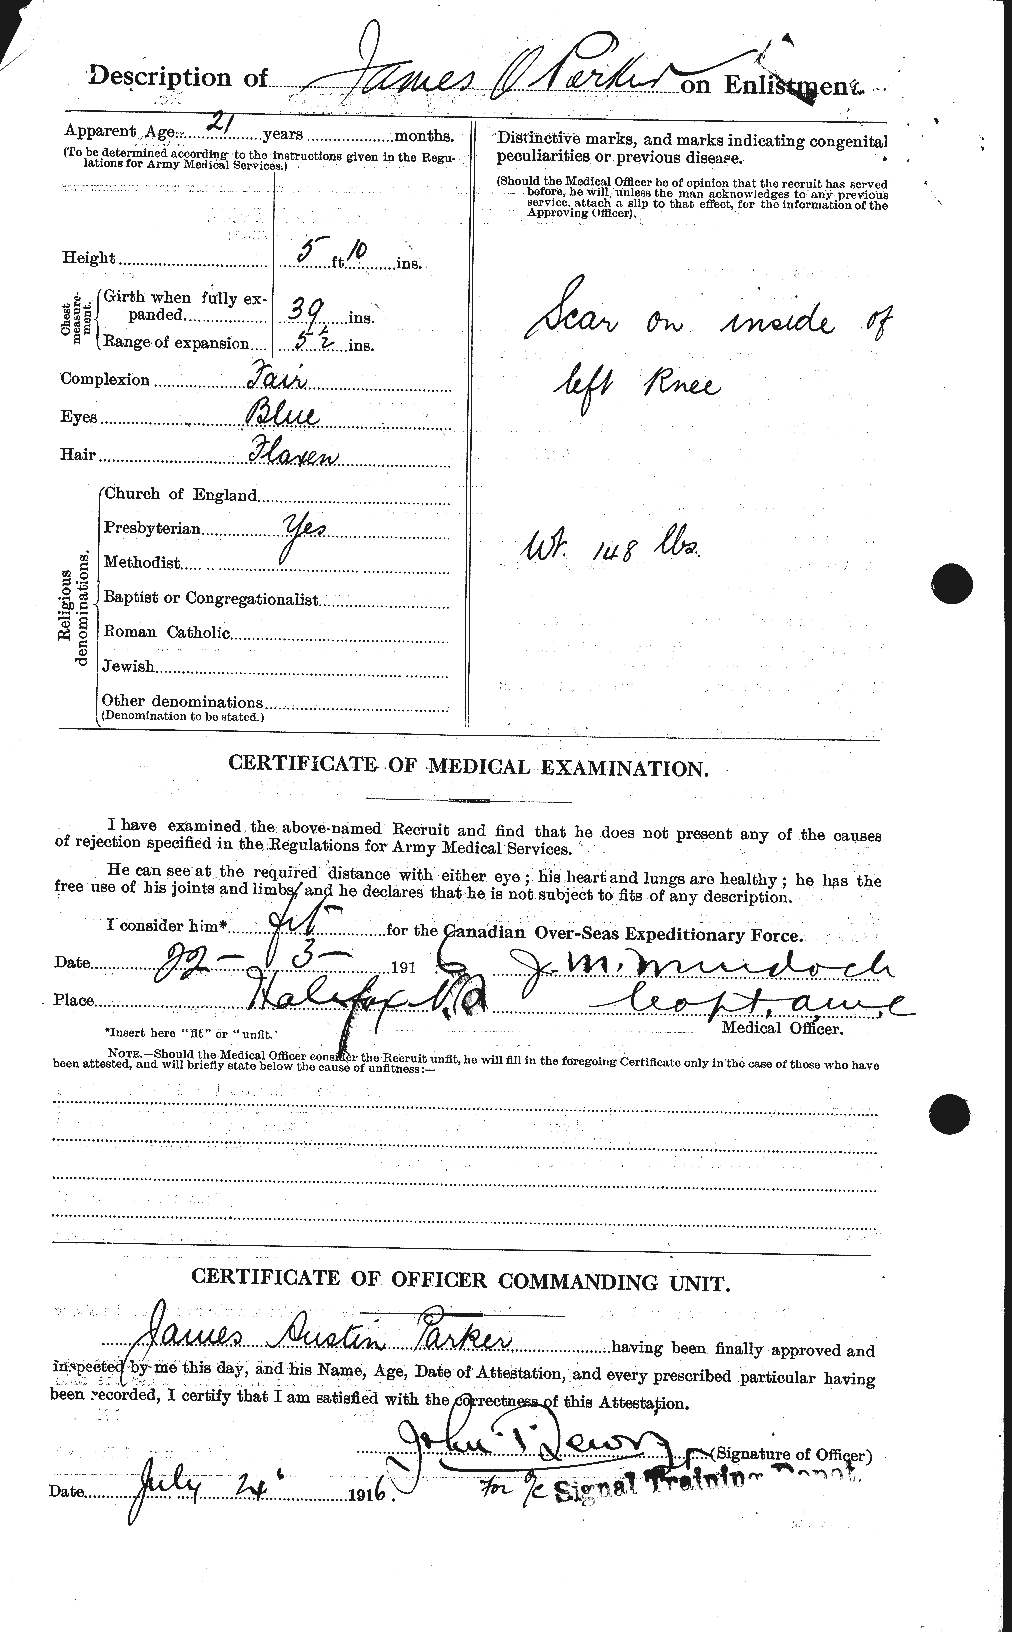 Personnel Records of the First World War - CEF 565424b